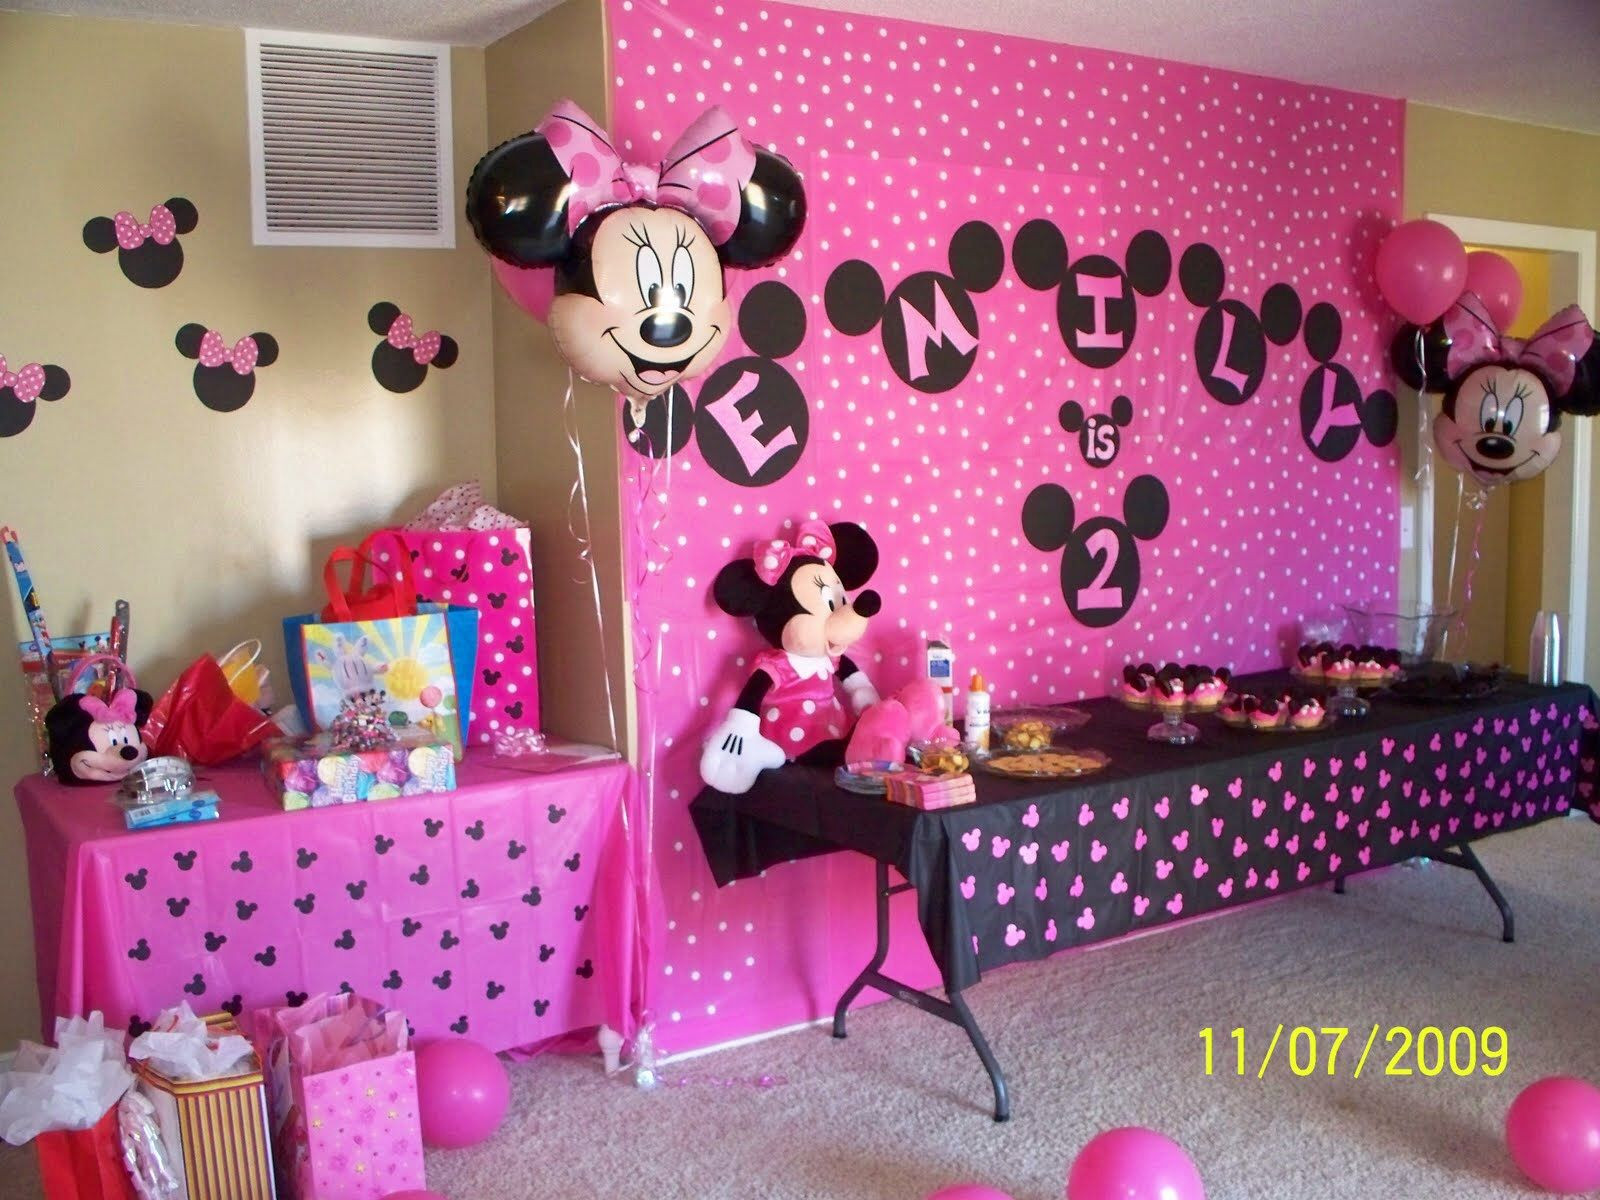 Minnie Mouse Birthday Party Decoration Ideas
 Homemade decorations